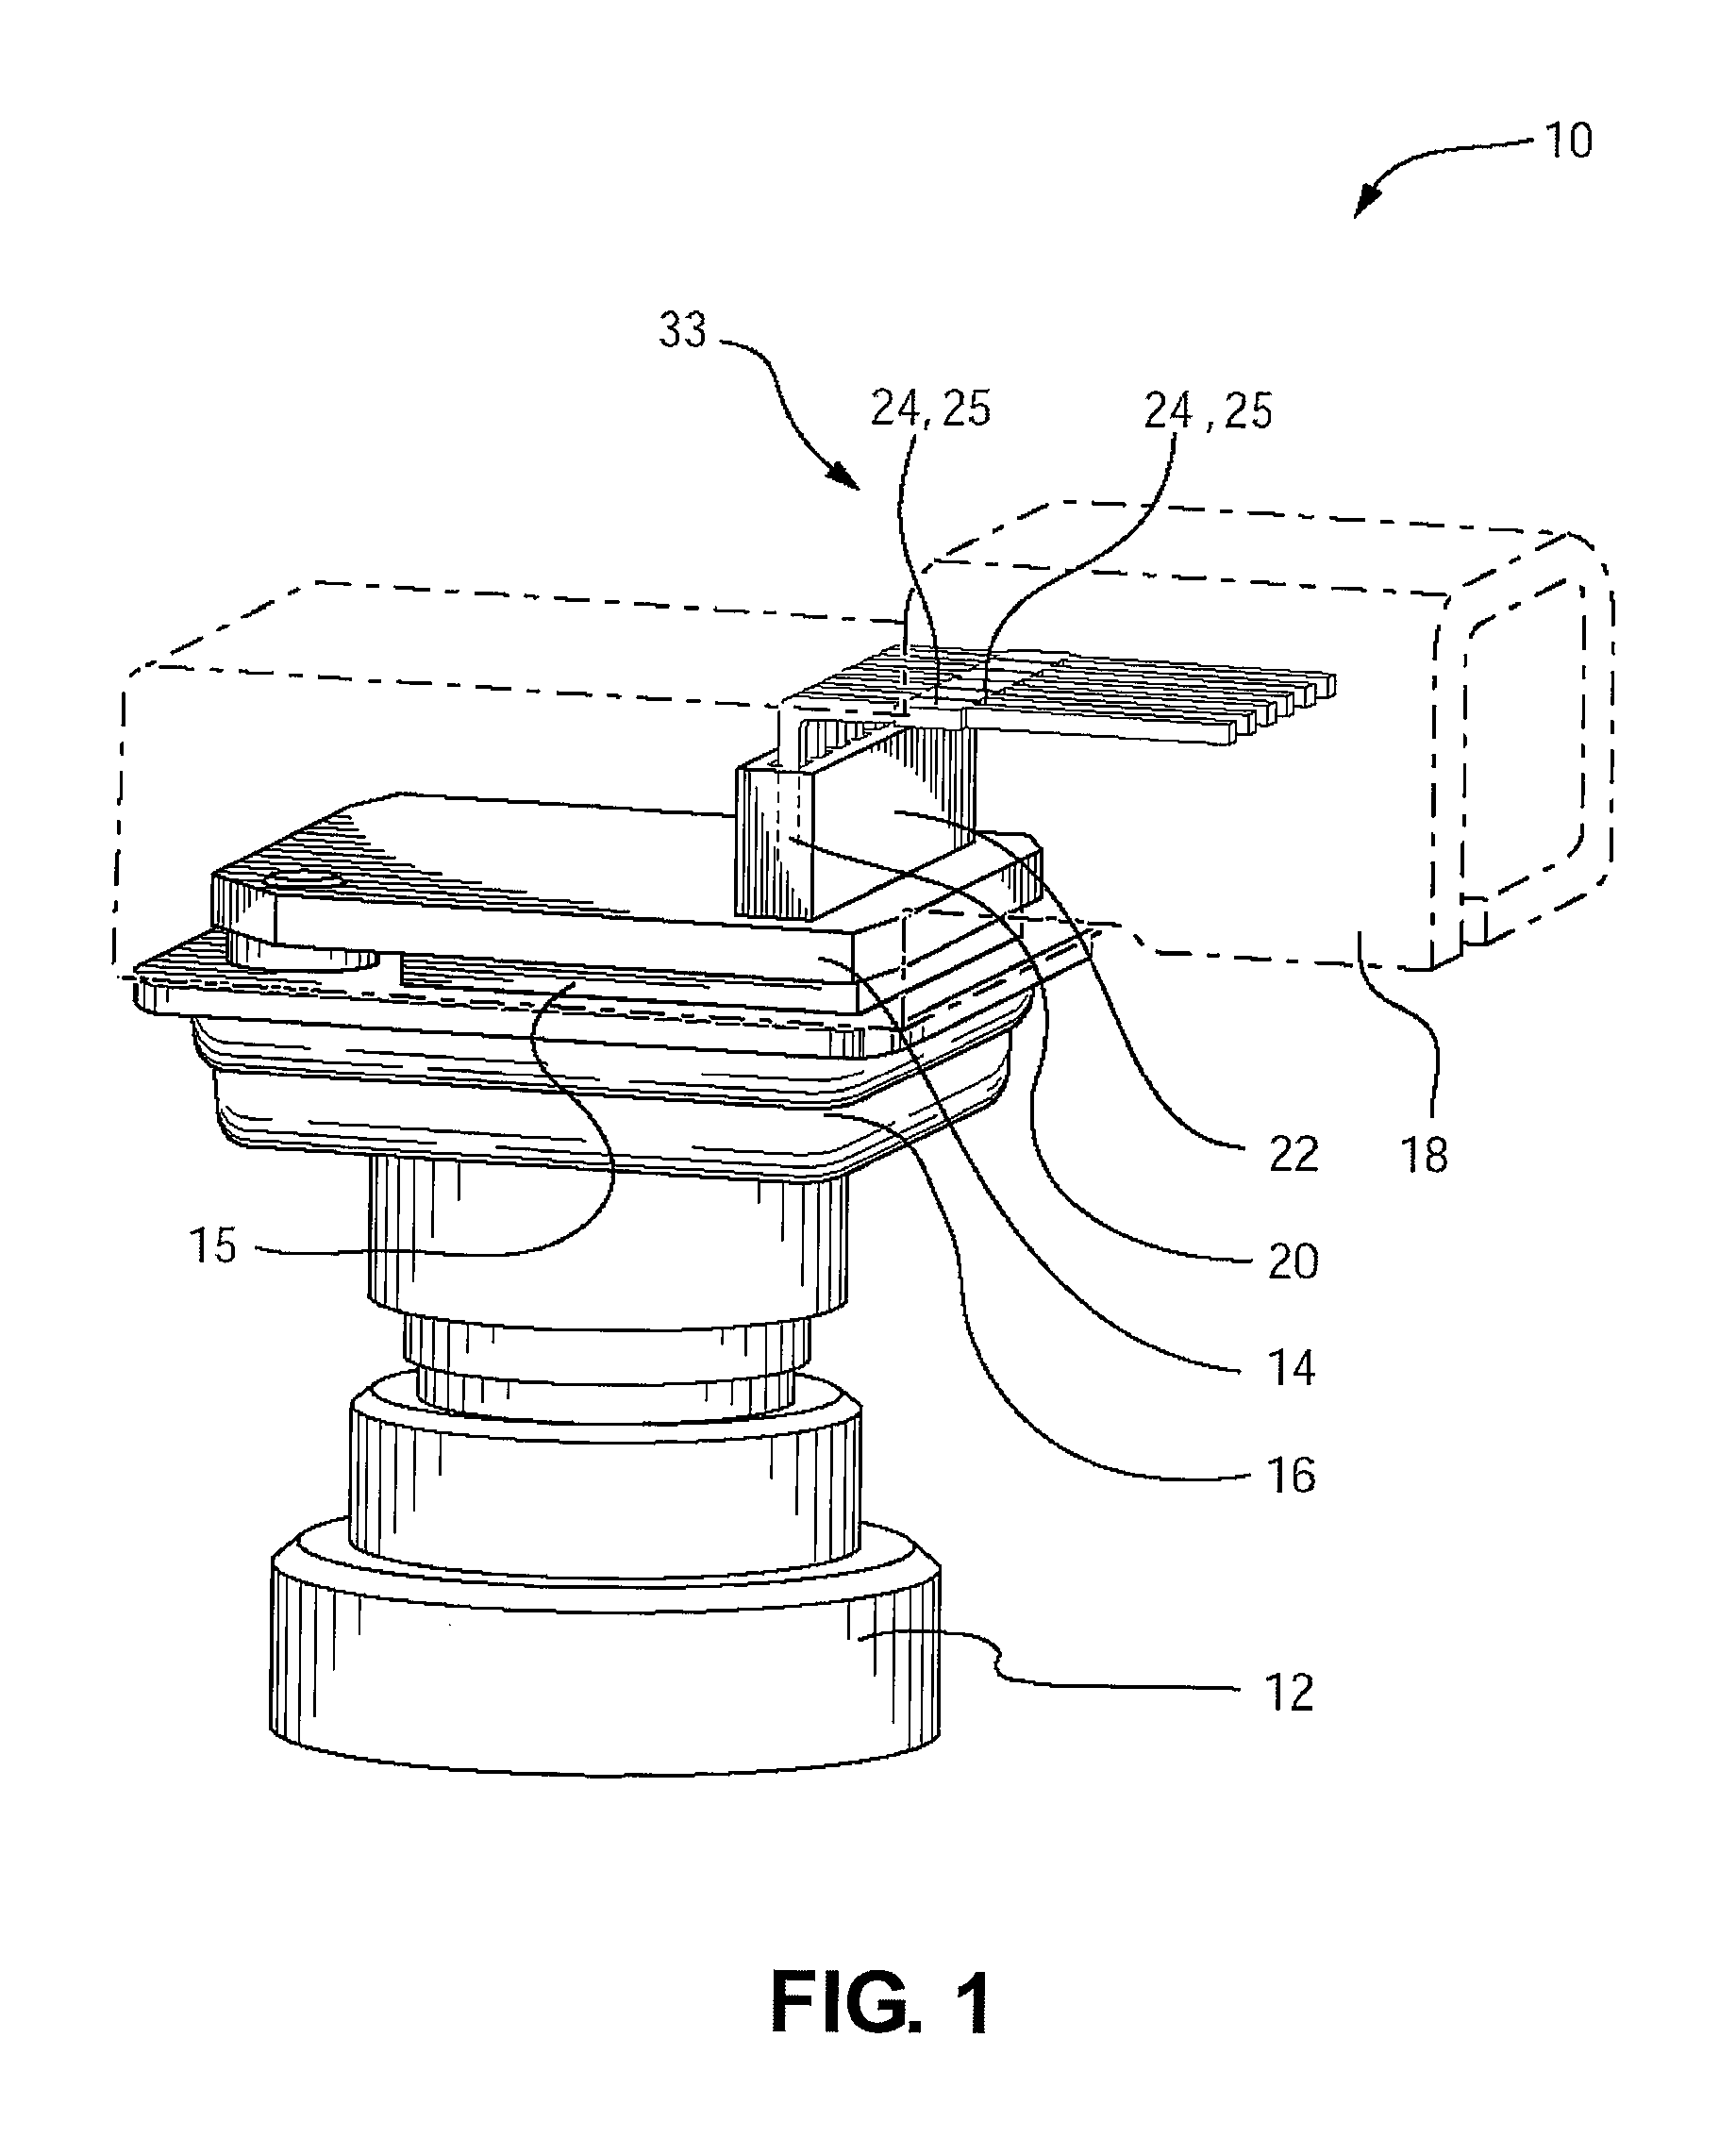 Camera for mounting on a vehicle